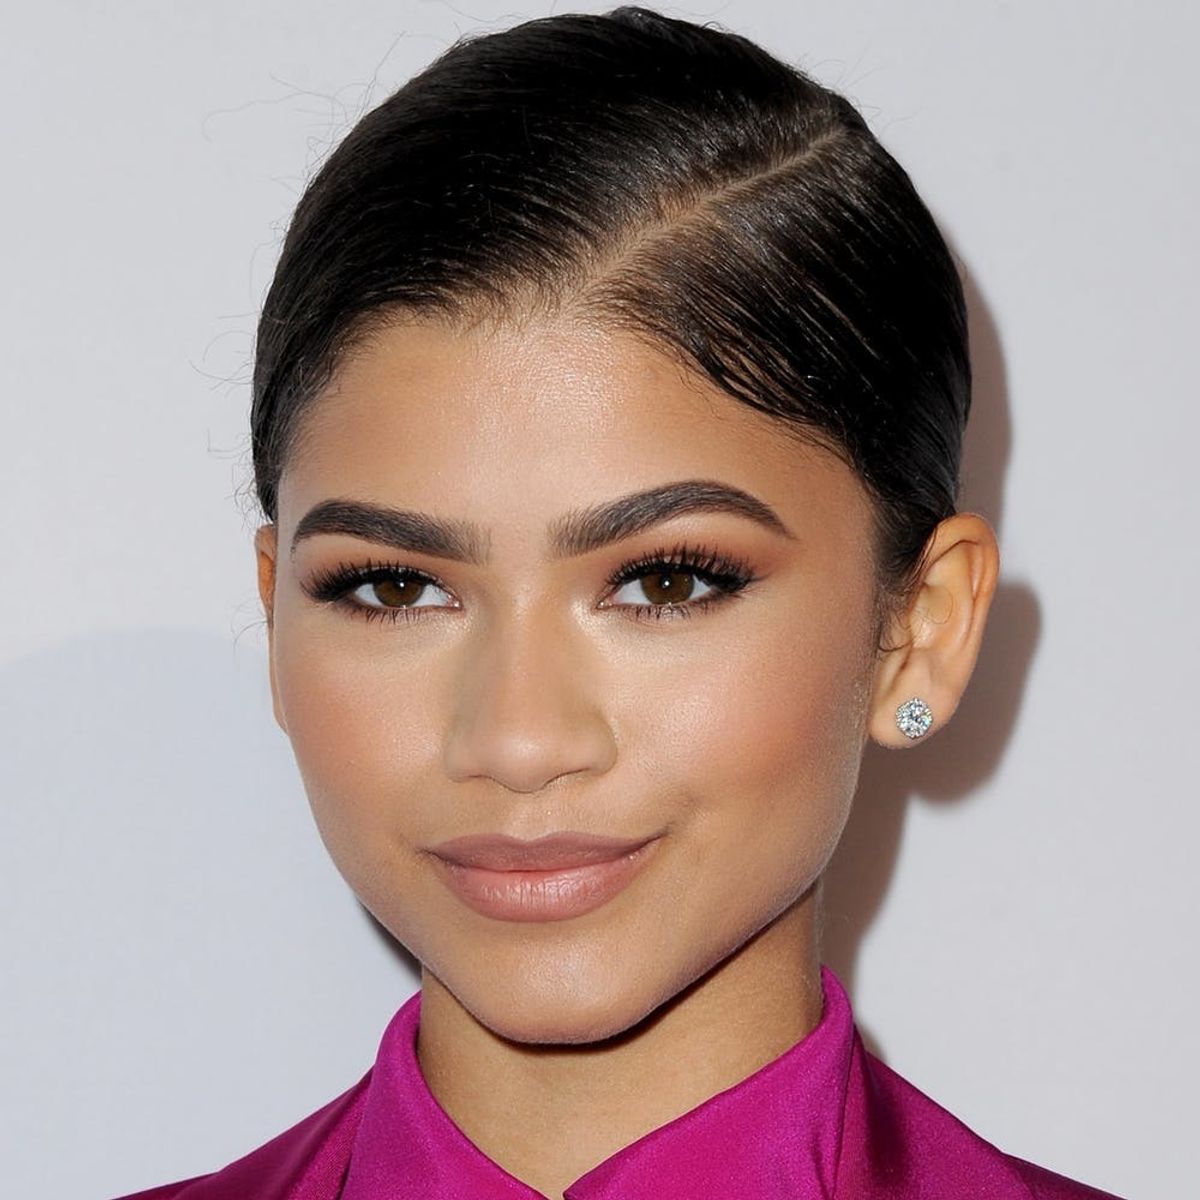 Steal Zendaya’s Trick to Get More Mileage Out of Your Summer Dresses